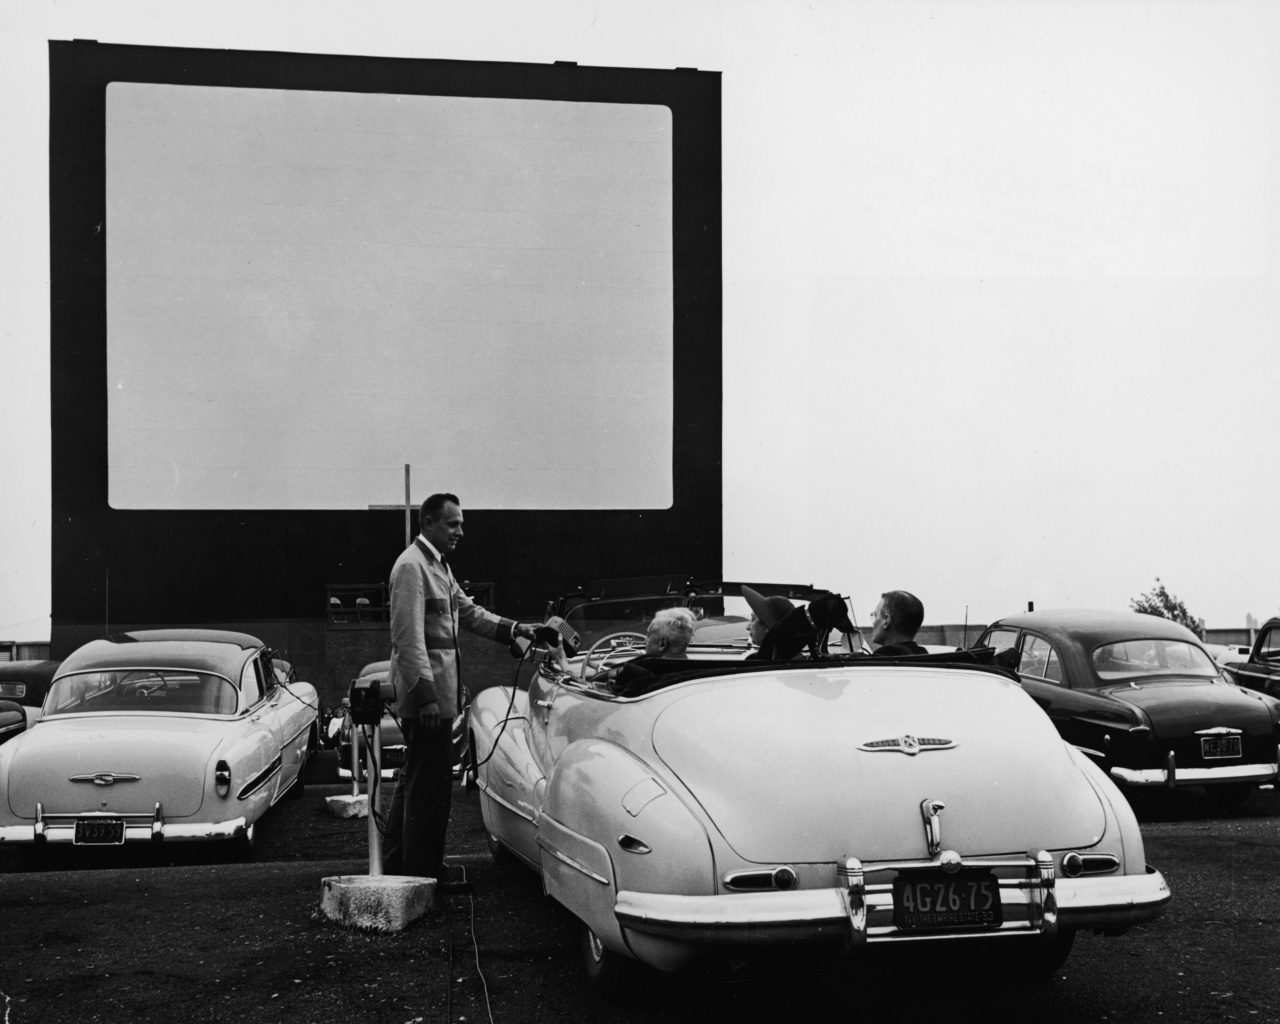 At A Drive-In Theater